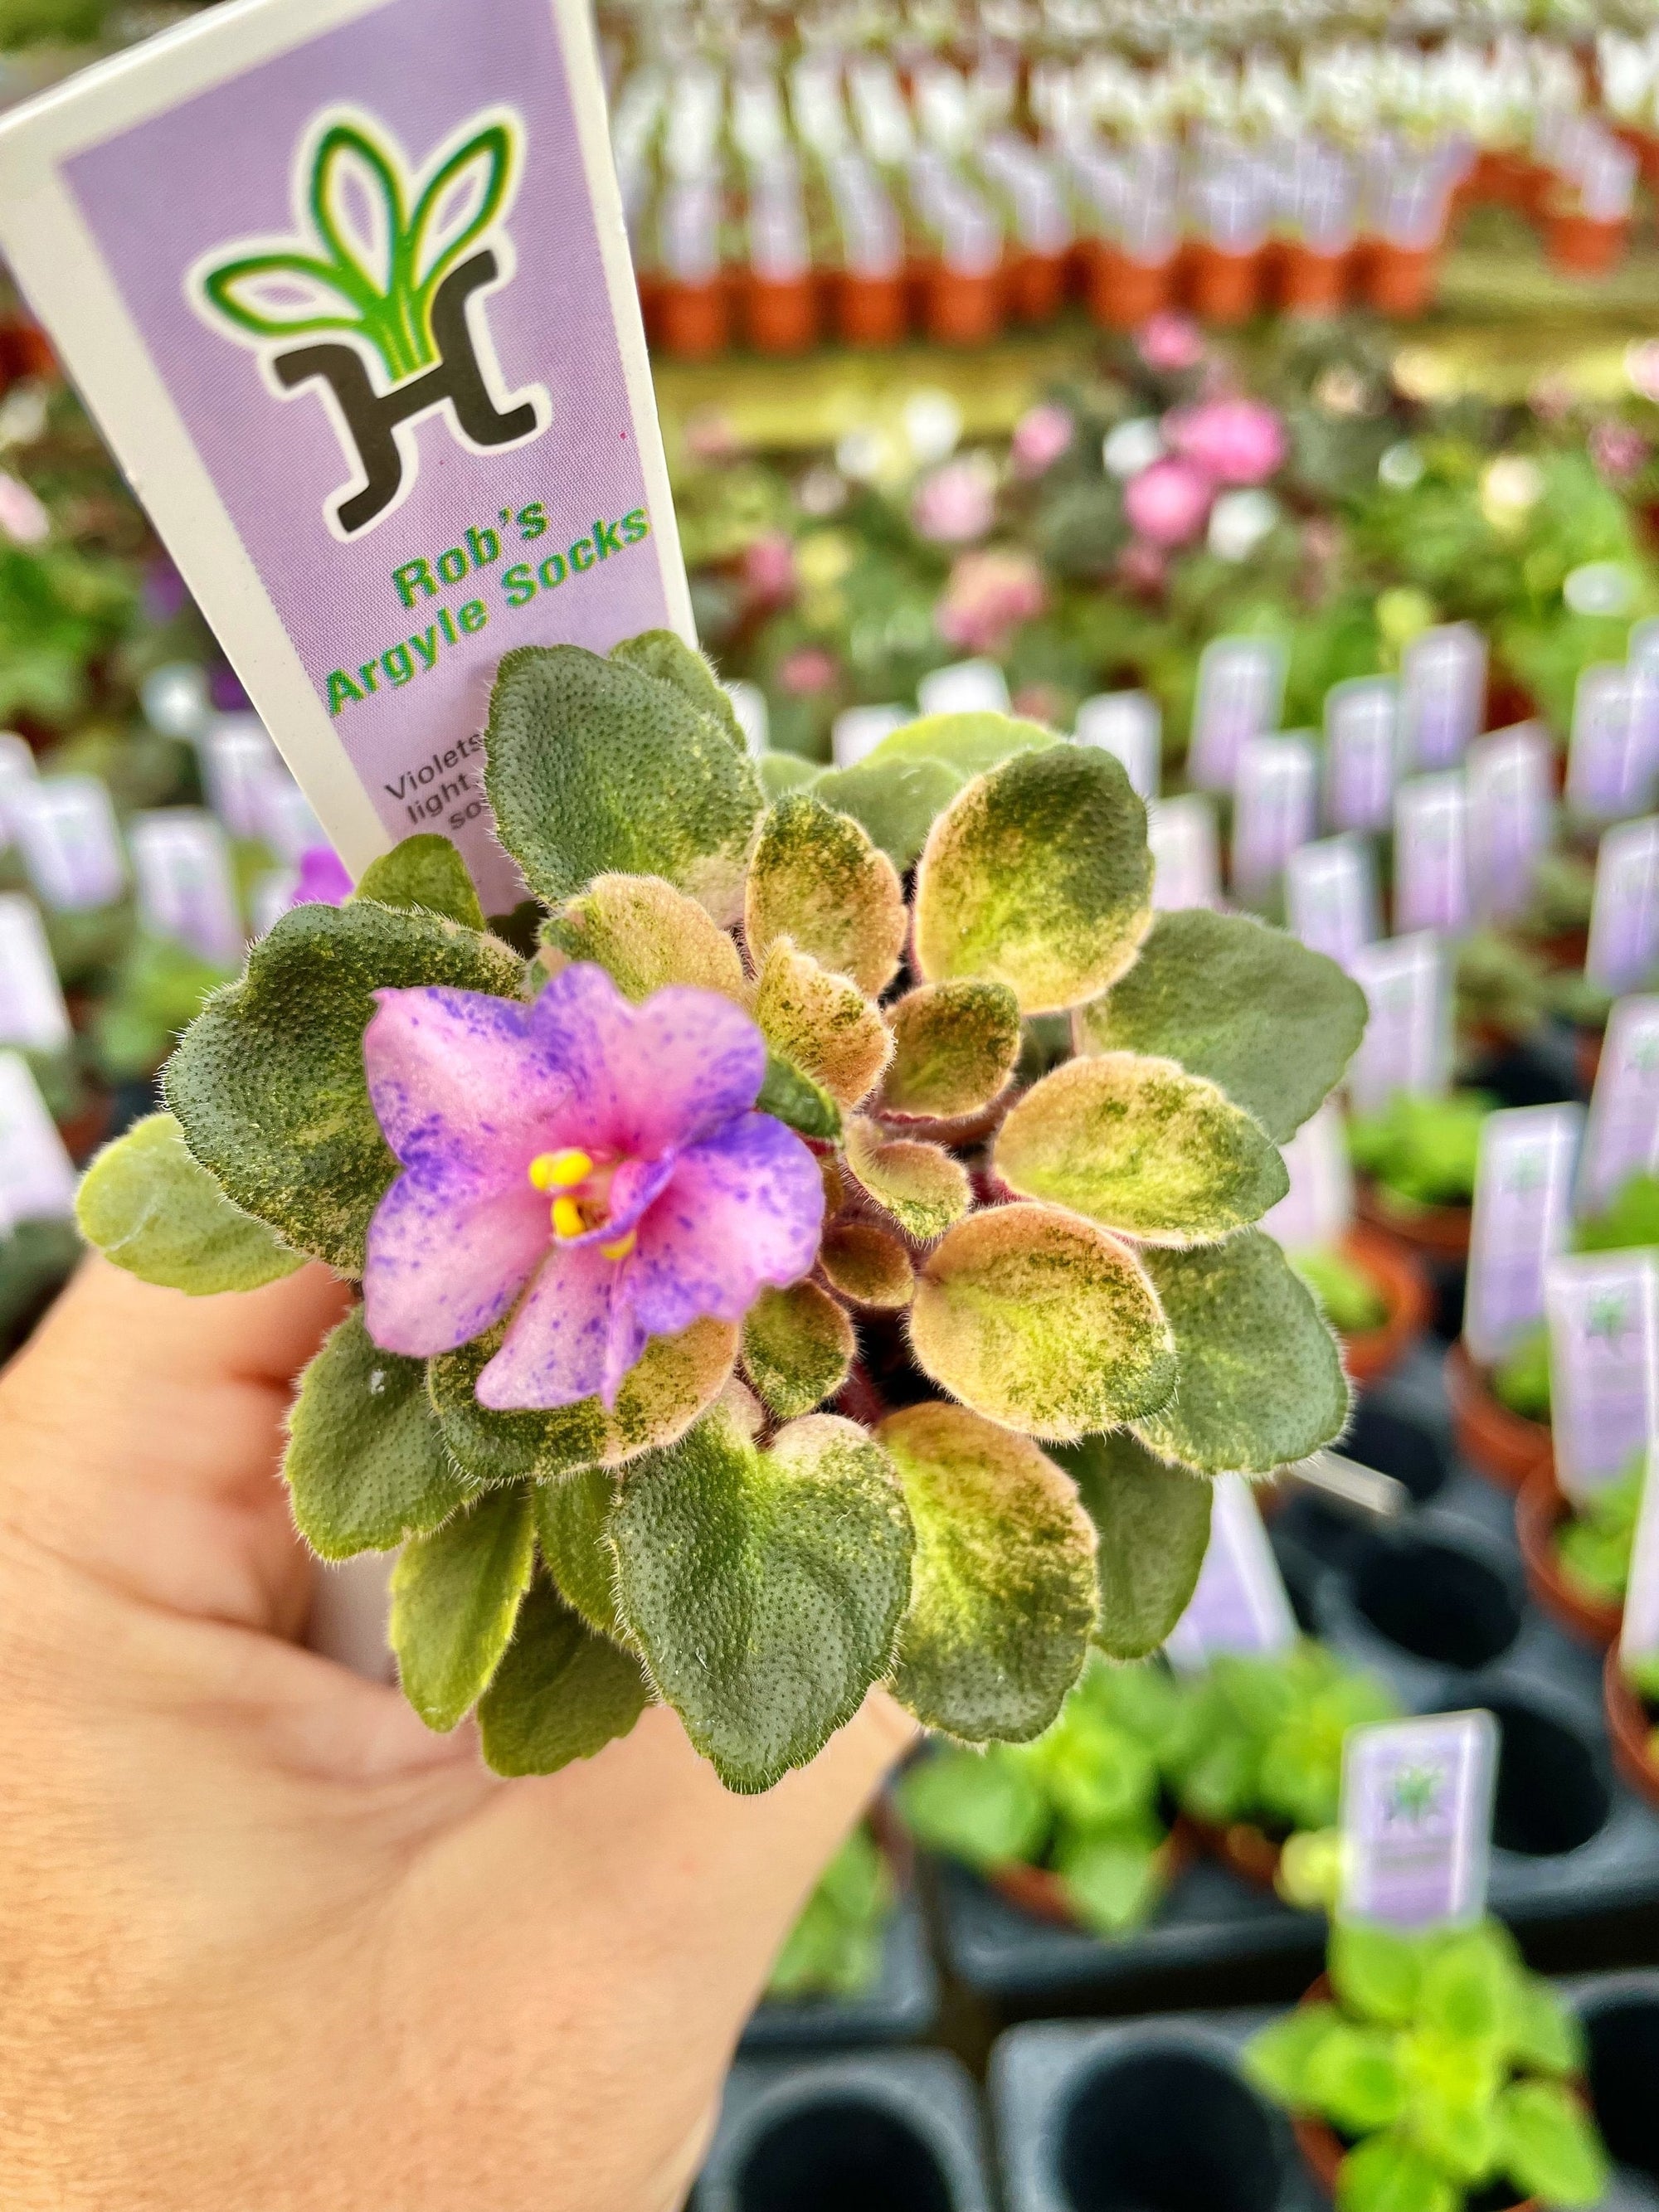 Miniature mini Variegated African Violet  Robs Argyle Socks fantasy bloom pink 2 Potted house plant flower gift pixie